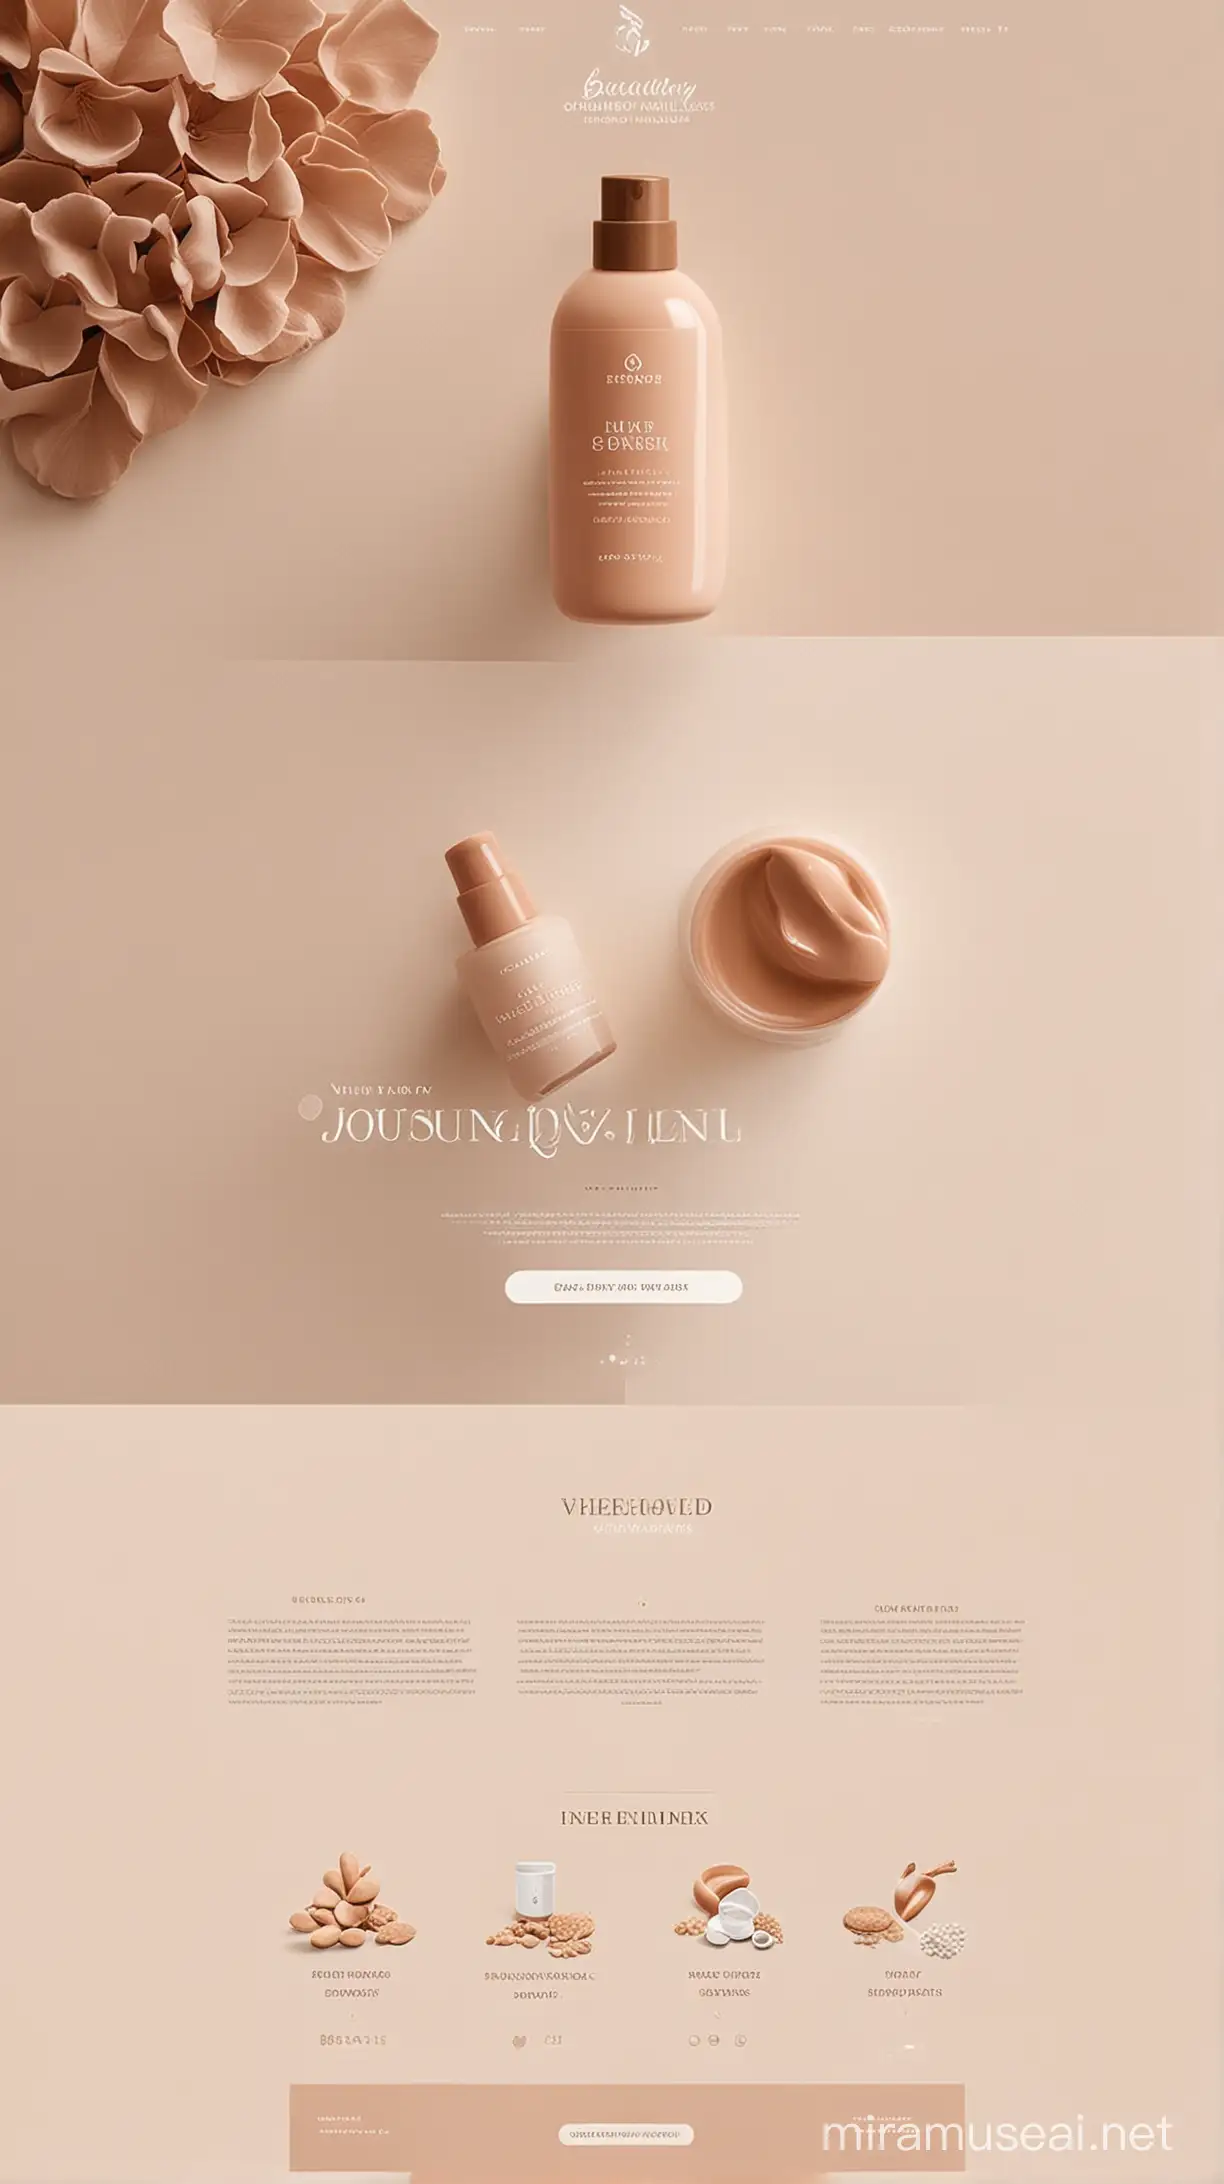 Elegant White and Nude Beauty Wellness Products for FullPage Ecommerce UIUX Design